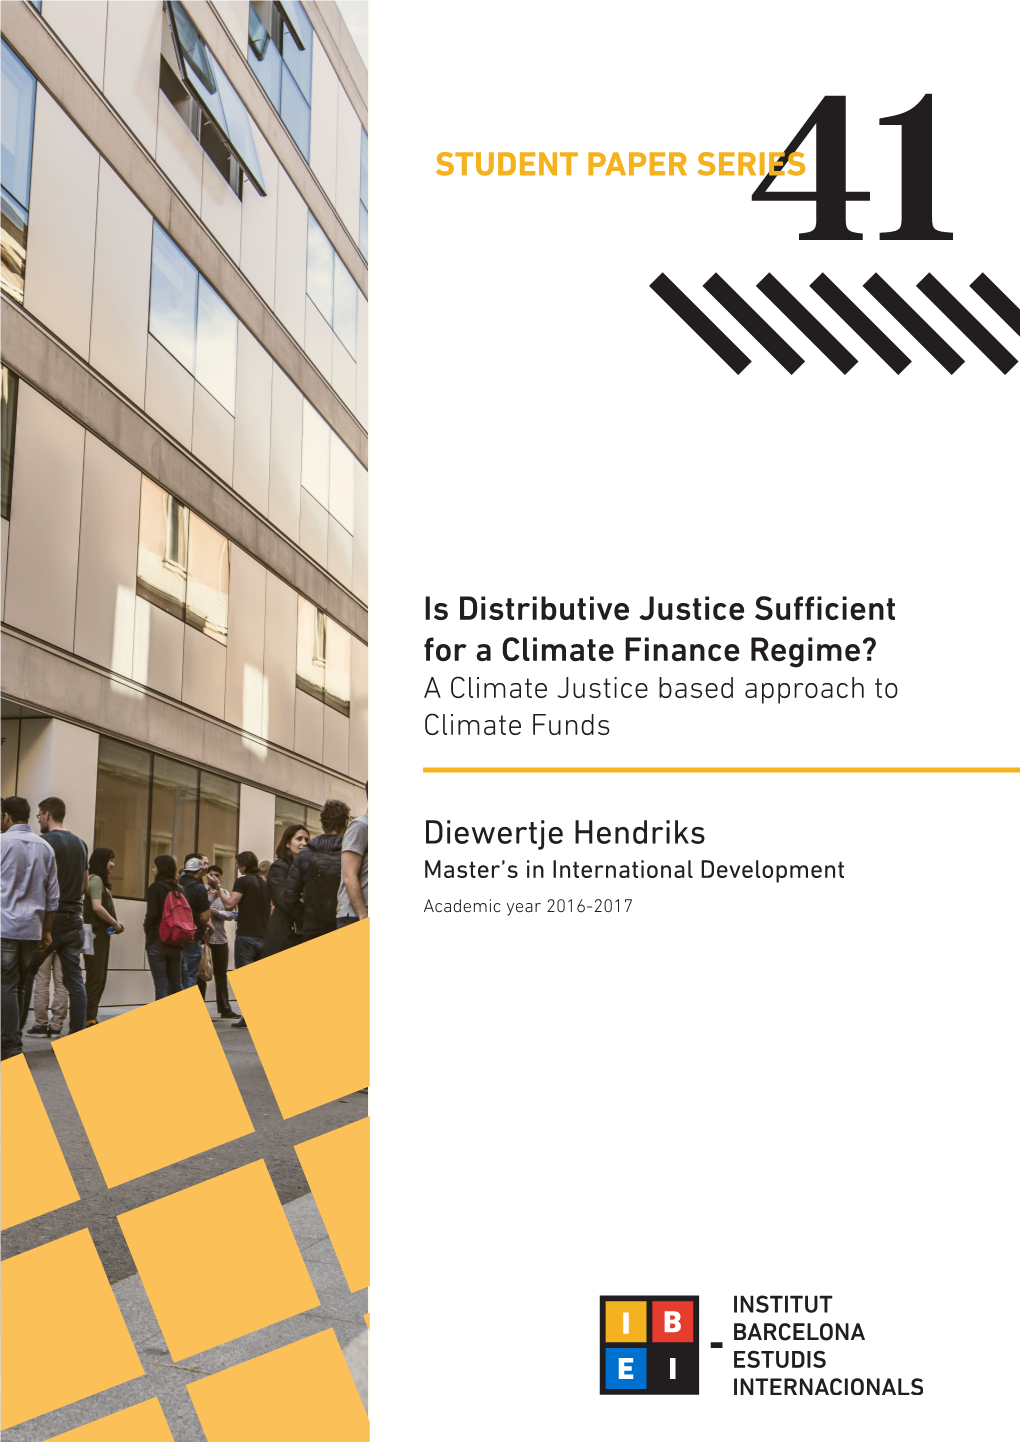 Is Distributive Justice Sufficient for a Climate Finance Regime? a Climate Justice Based Approach to Climate Funds